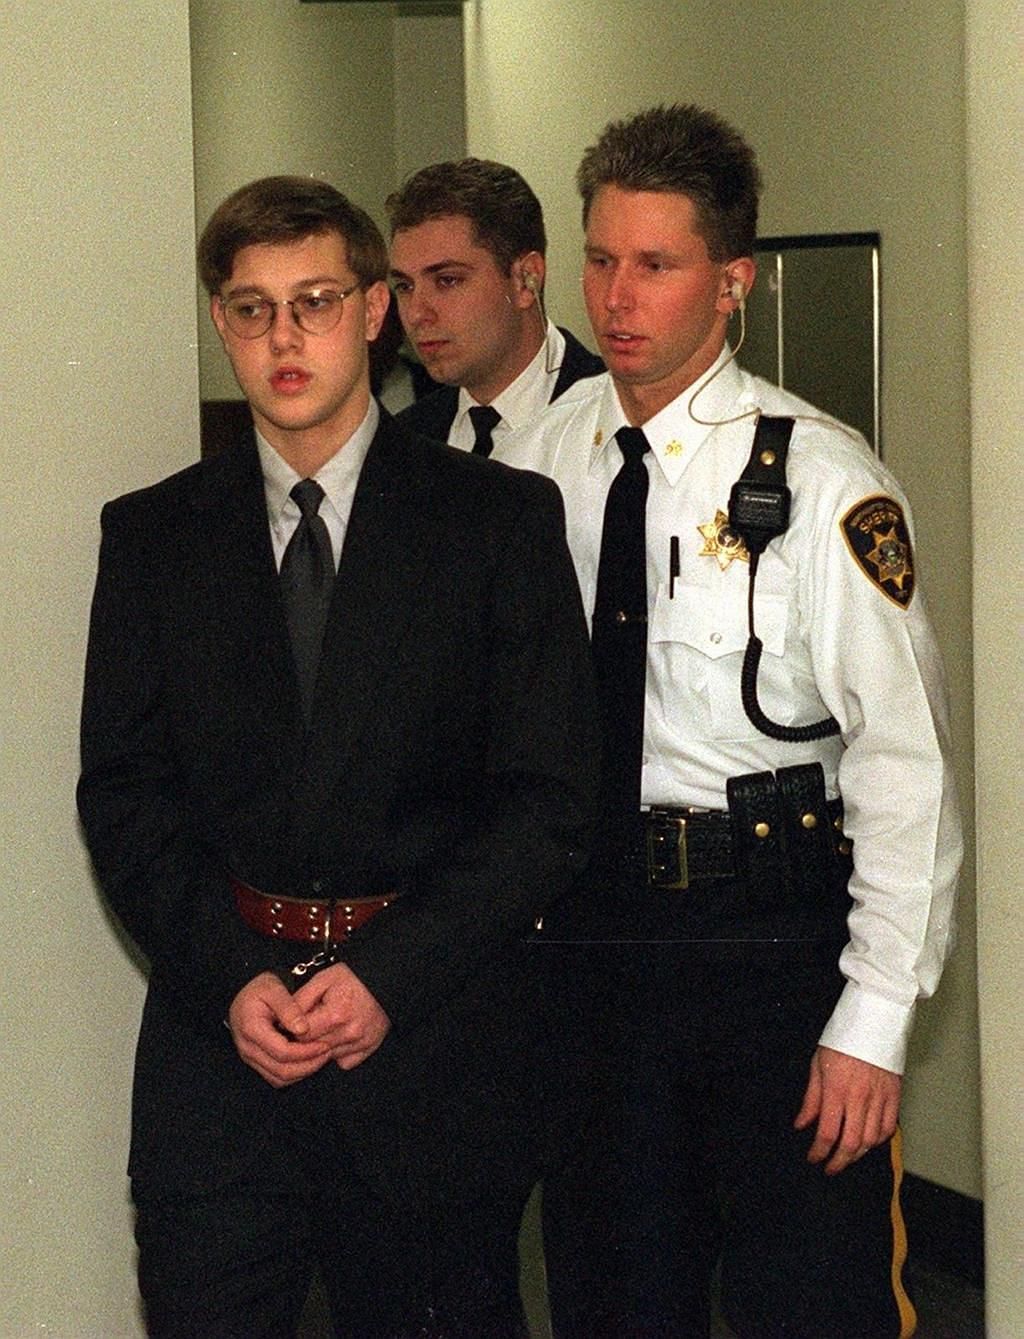 Christopher Bissey is serving life imprisonment on a dual murder charge (Image via Investigation Discovery)